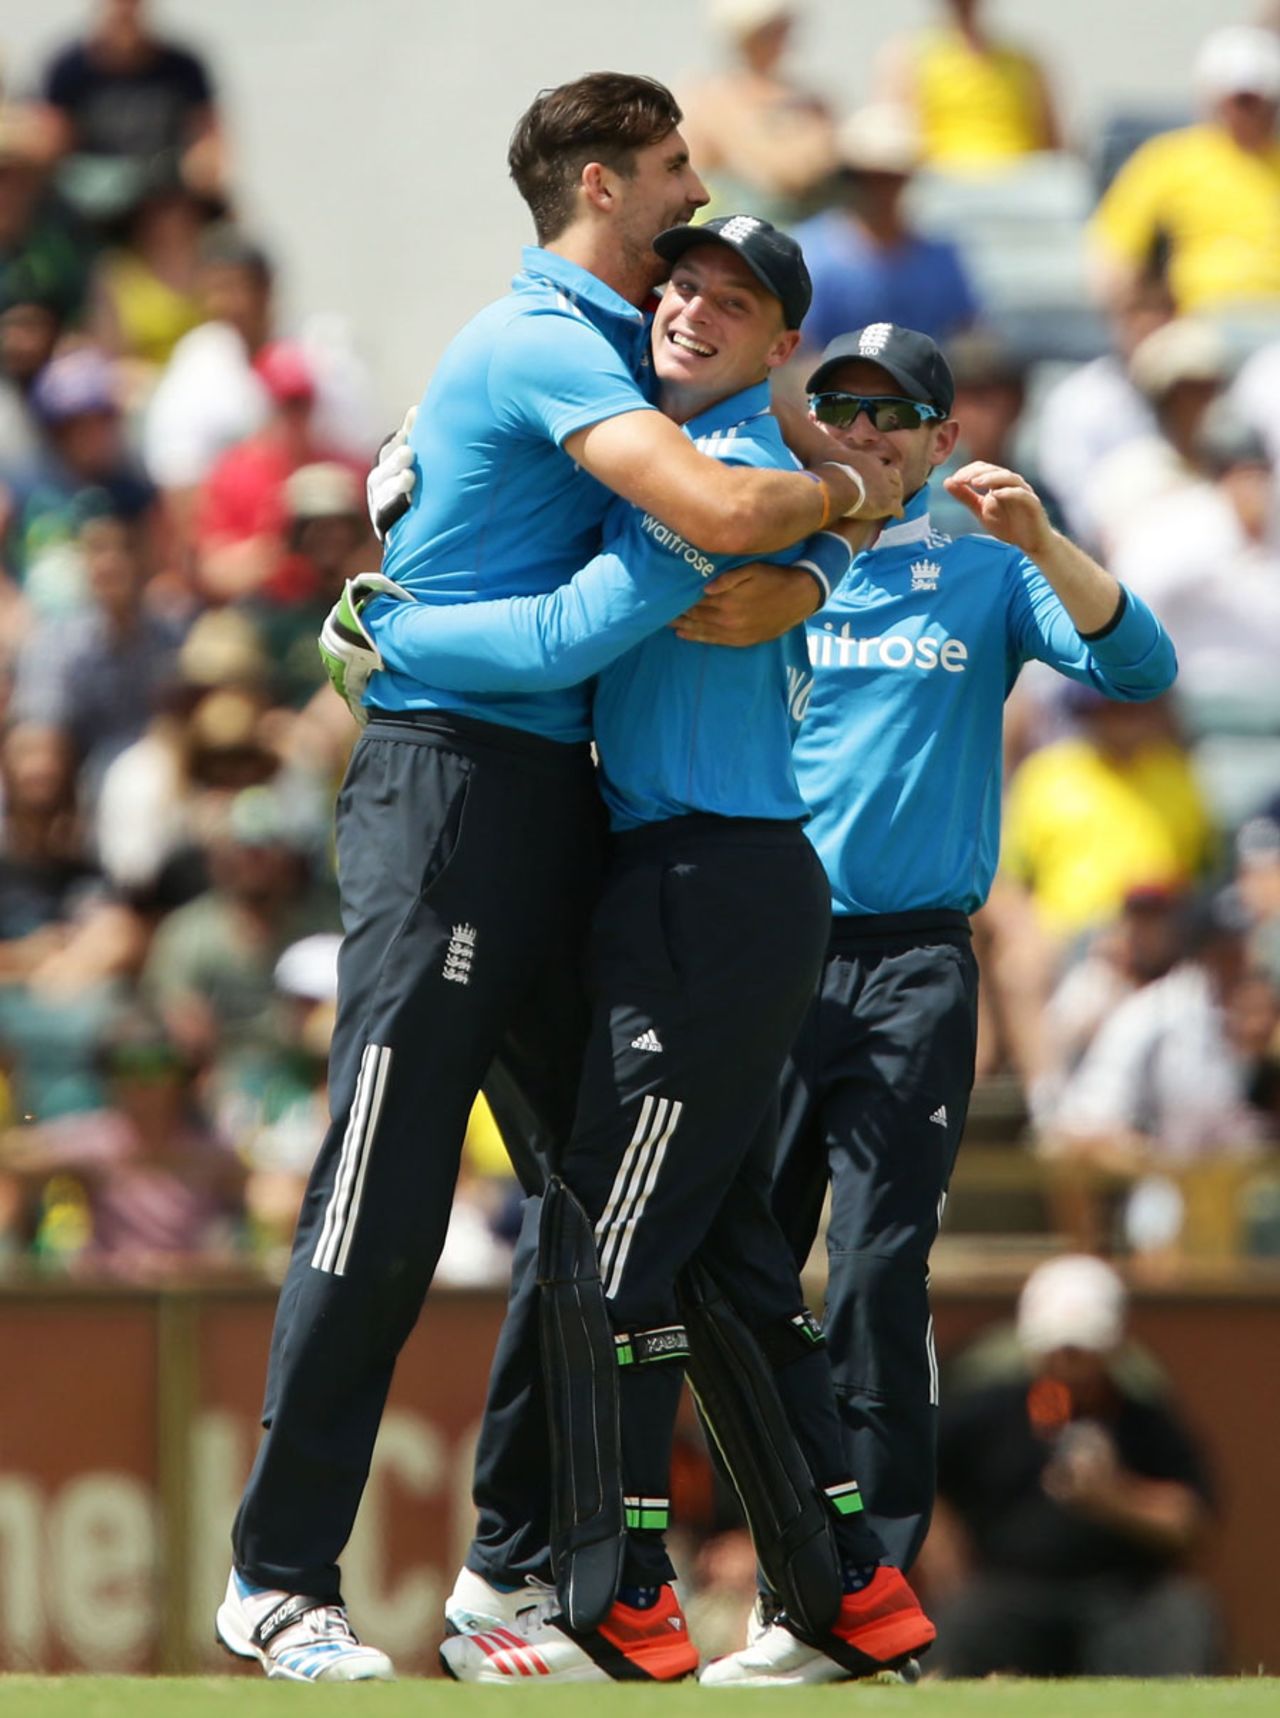 Steven Finn and Jos Buttler embrace after running Mitchell Marsh out, Australia v England, Carlton Mid Tri-series final, Perth, February 1, 2015